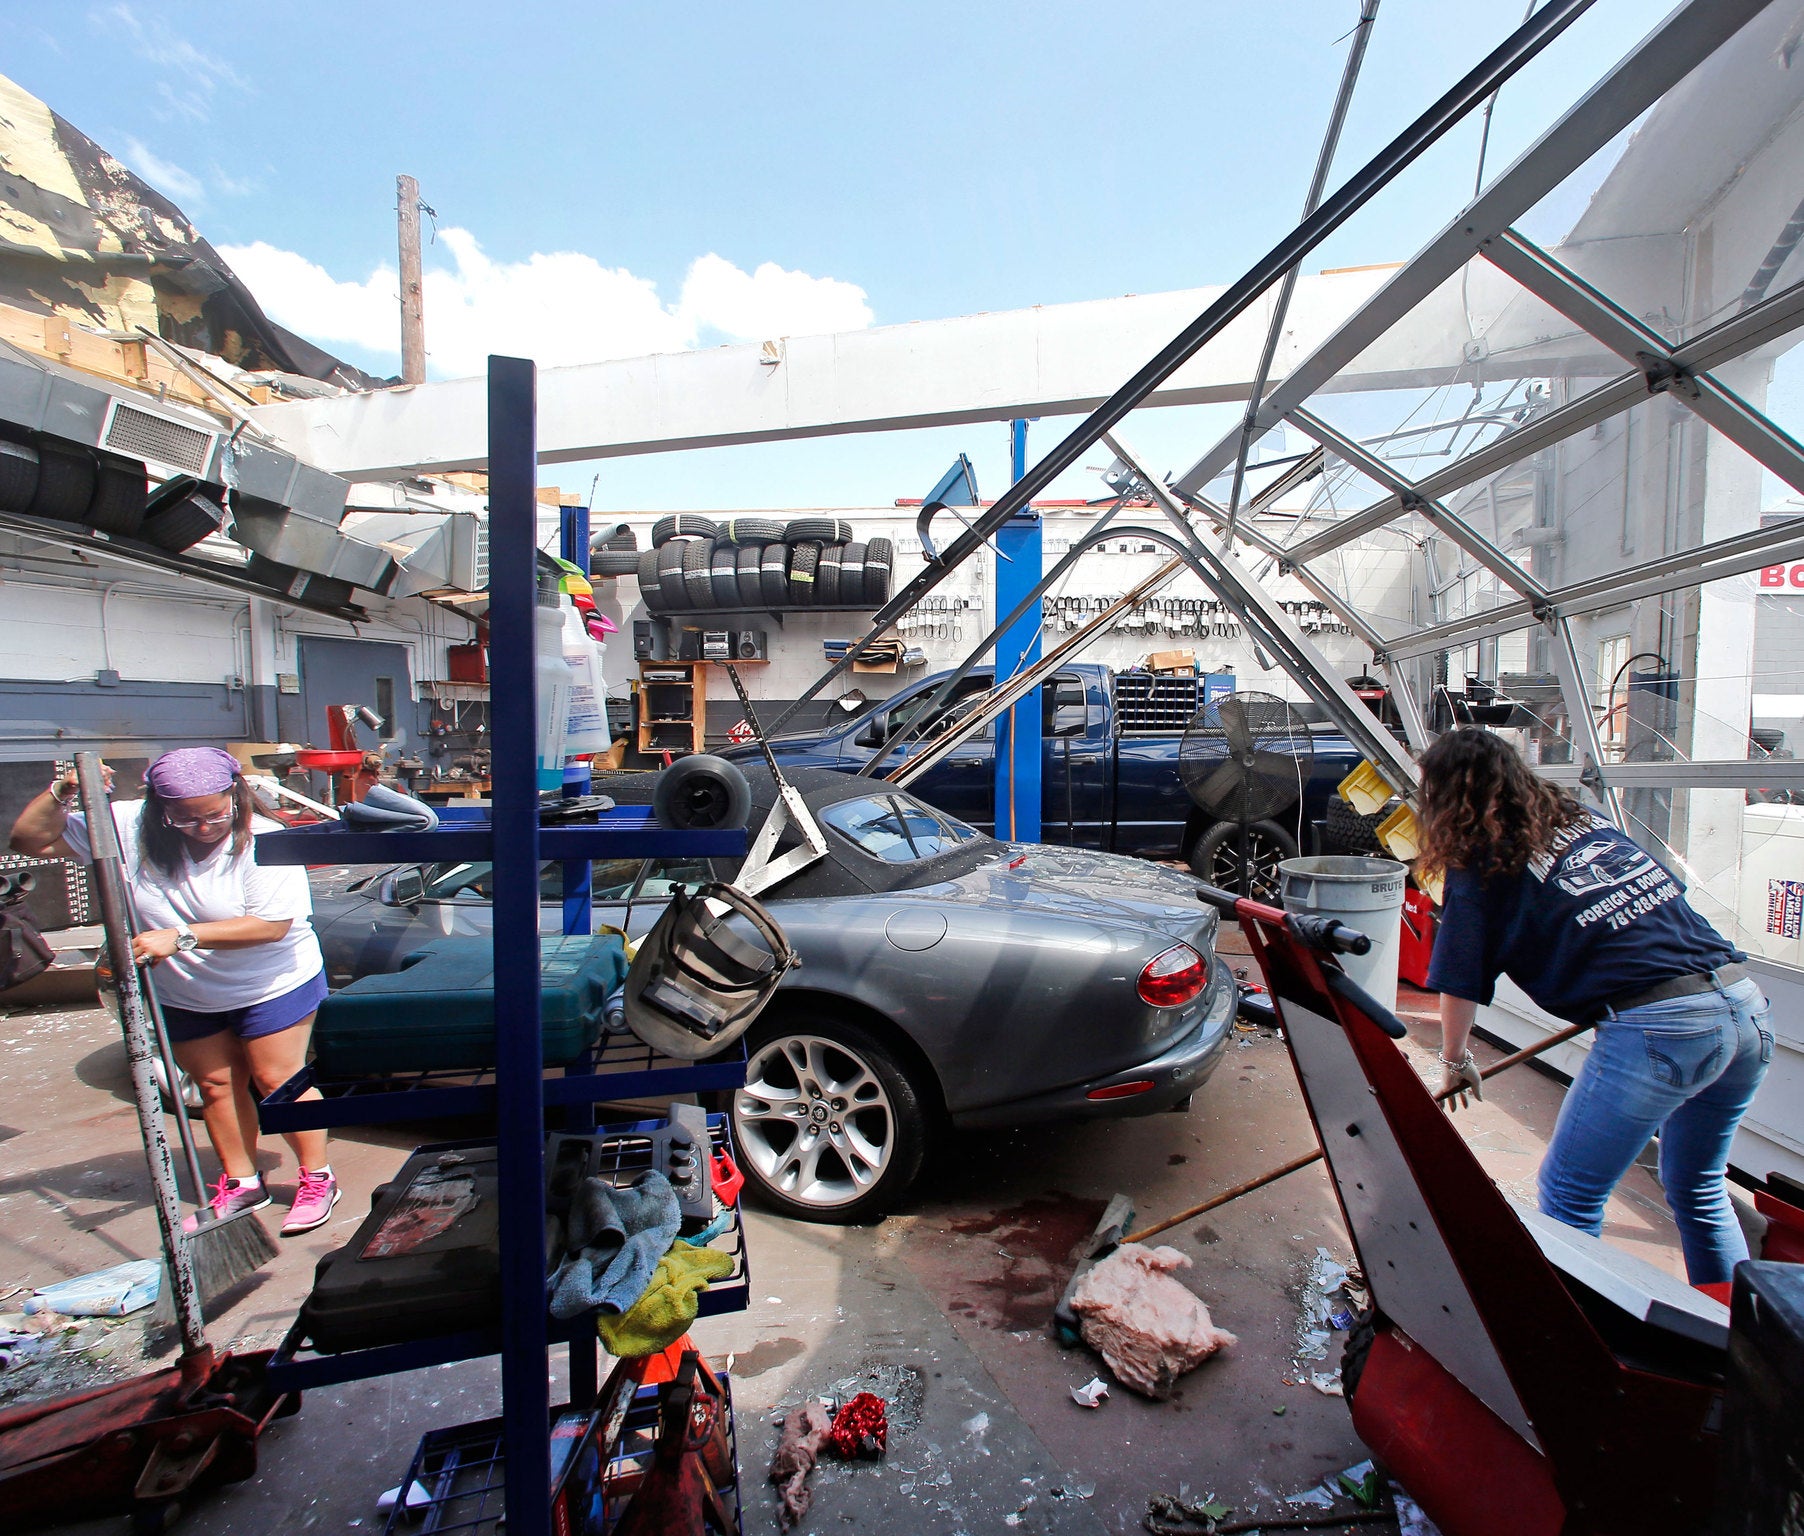 Master Auto manager Marie Annaloro, left, and Victoria Ohlson,right, sweep glass and debris in the service garage where the roof blew off in Revere, Mass